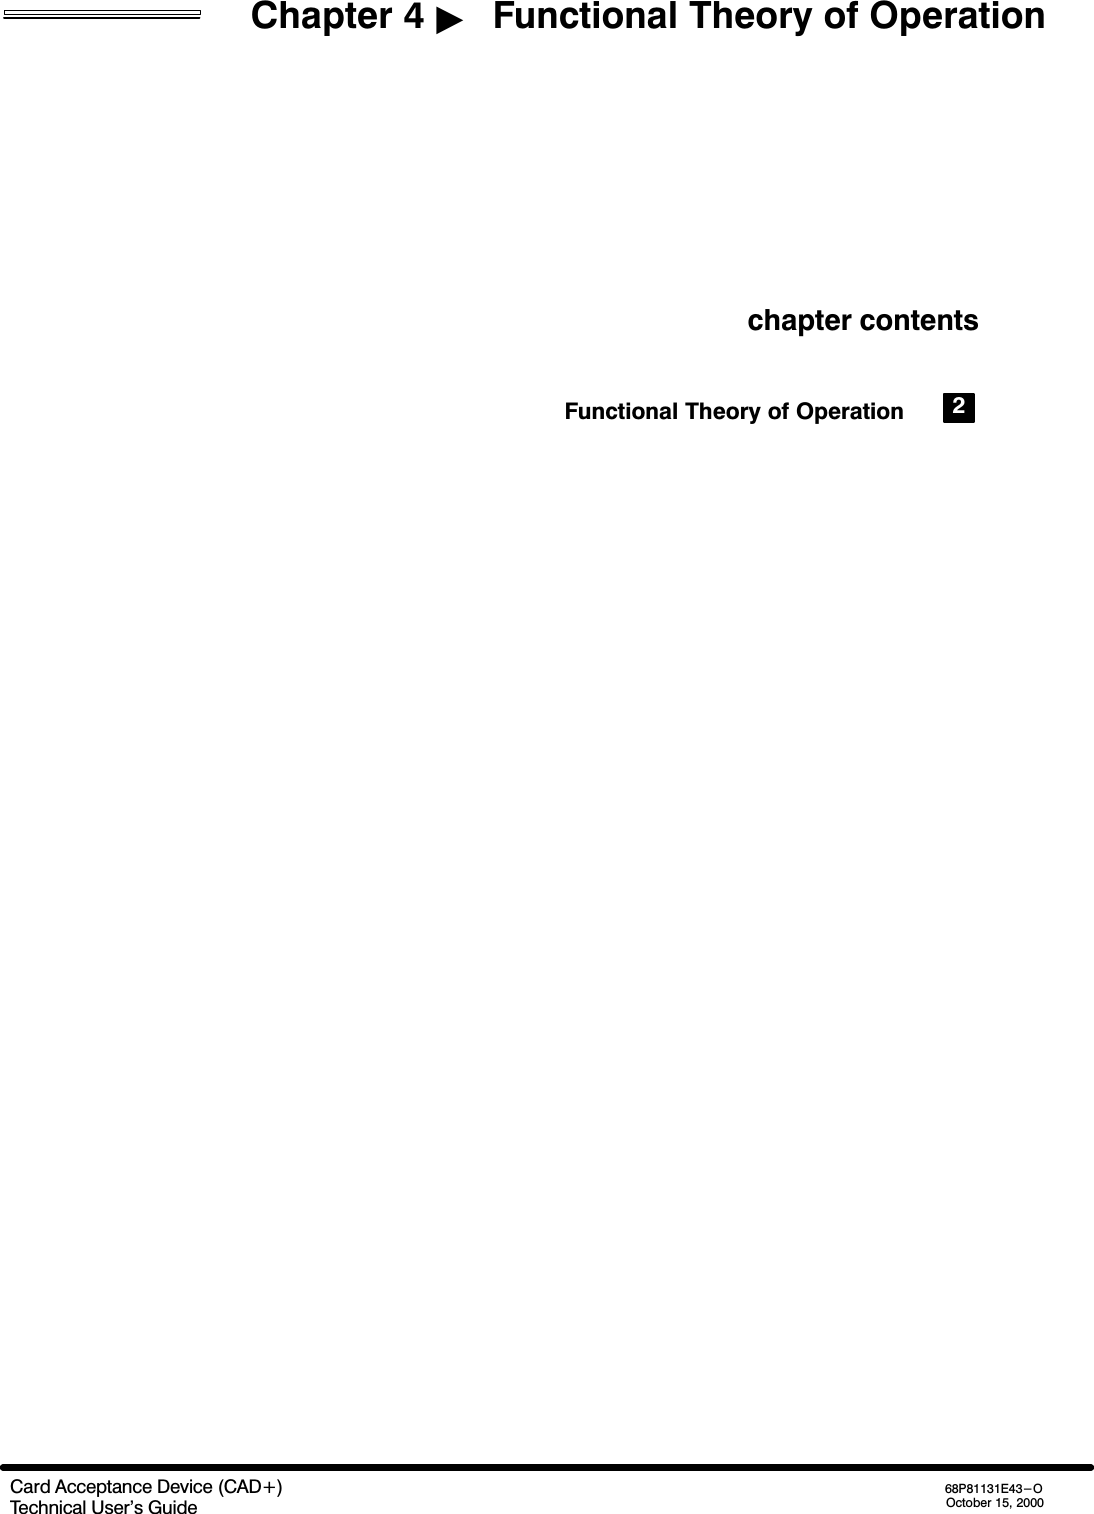 Chapter 4   Functional Theory of OperationCard Acceptance Device (CAD+)Technical User&apos;s Guide68P81131E43-OOctober 15, 2000chapter contentsFunctional Theory of Operation 2